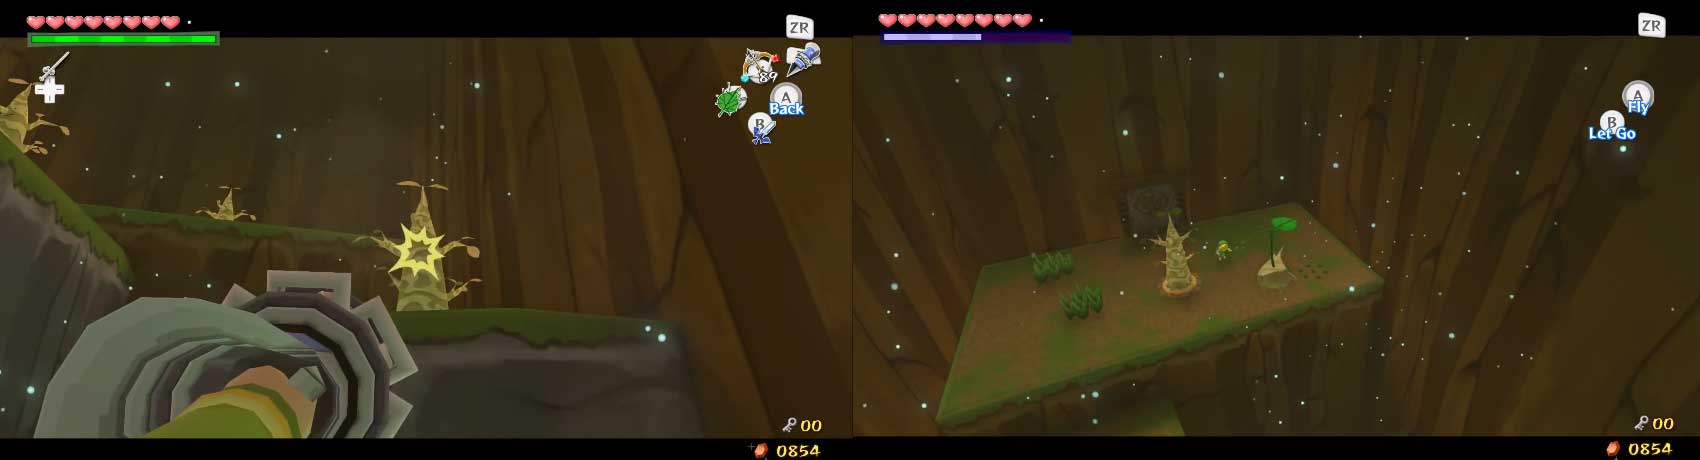 Make Link Hookshot up to that tree, and defeat any Blue Bubbles you can. Then fly Makar to the next ledge and repeat this until you get to the highest ledge. There, pick Makar up and go through the door.